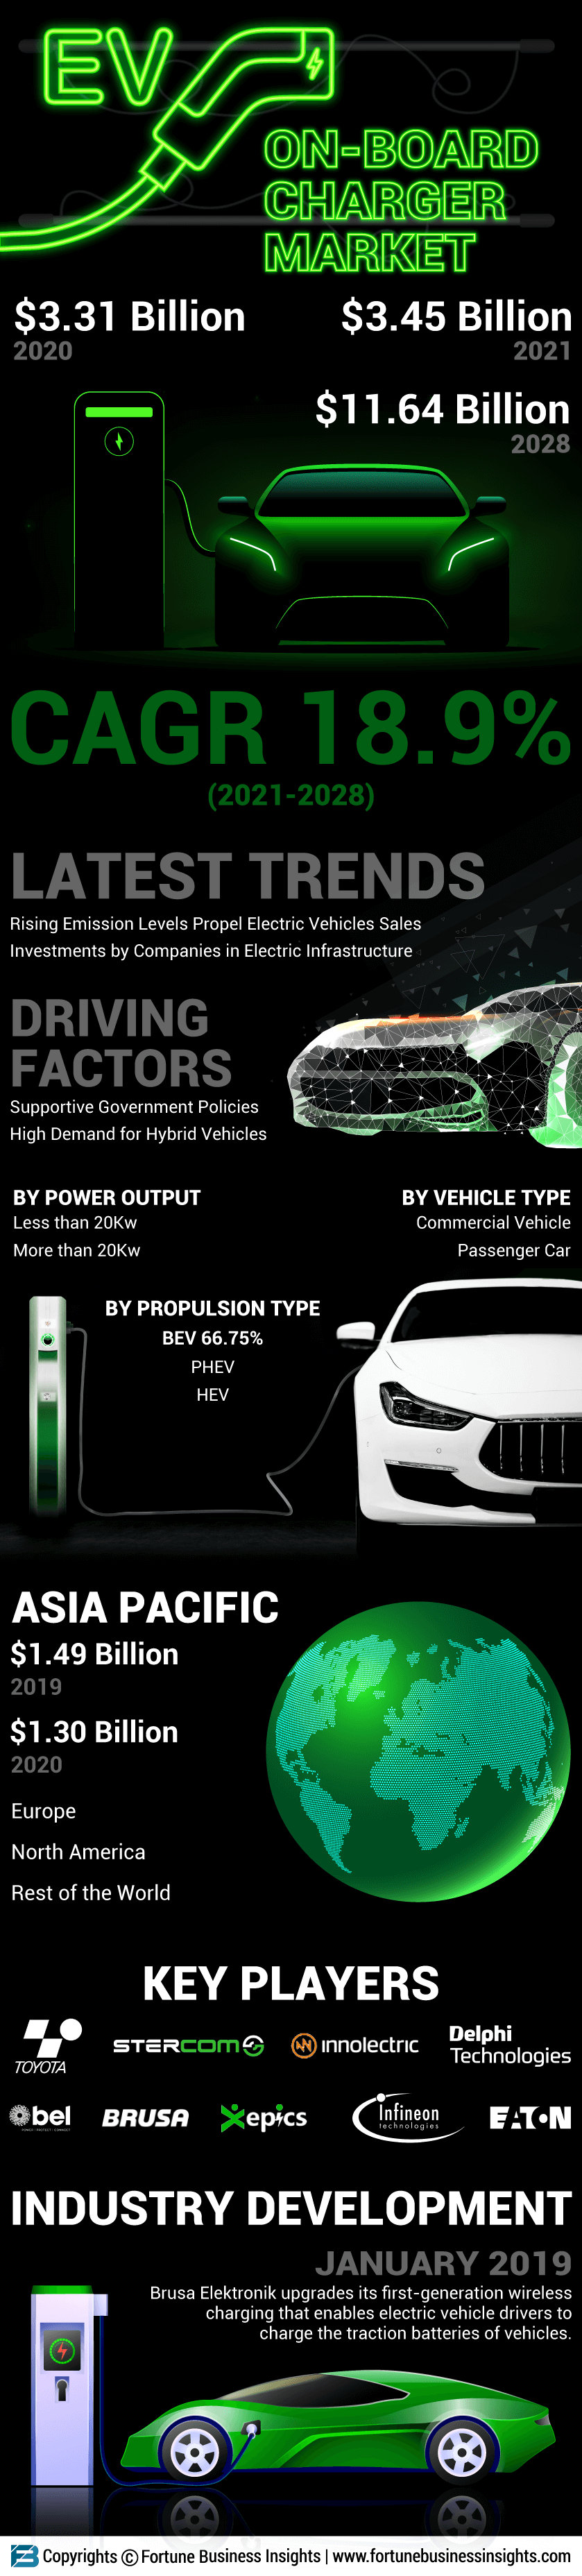 Electric Vehicle On-Board Charger Market